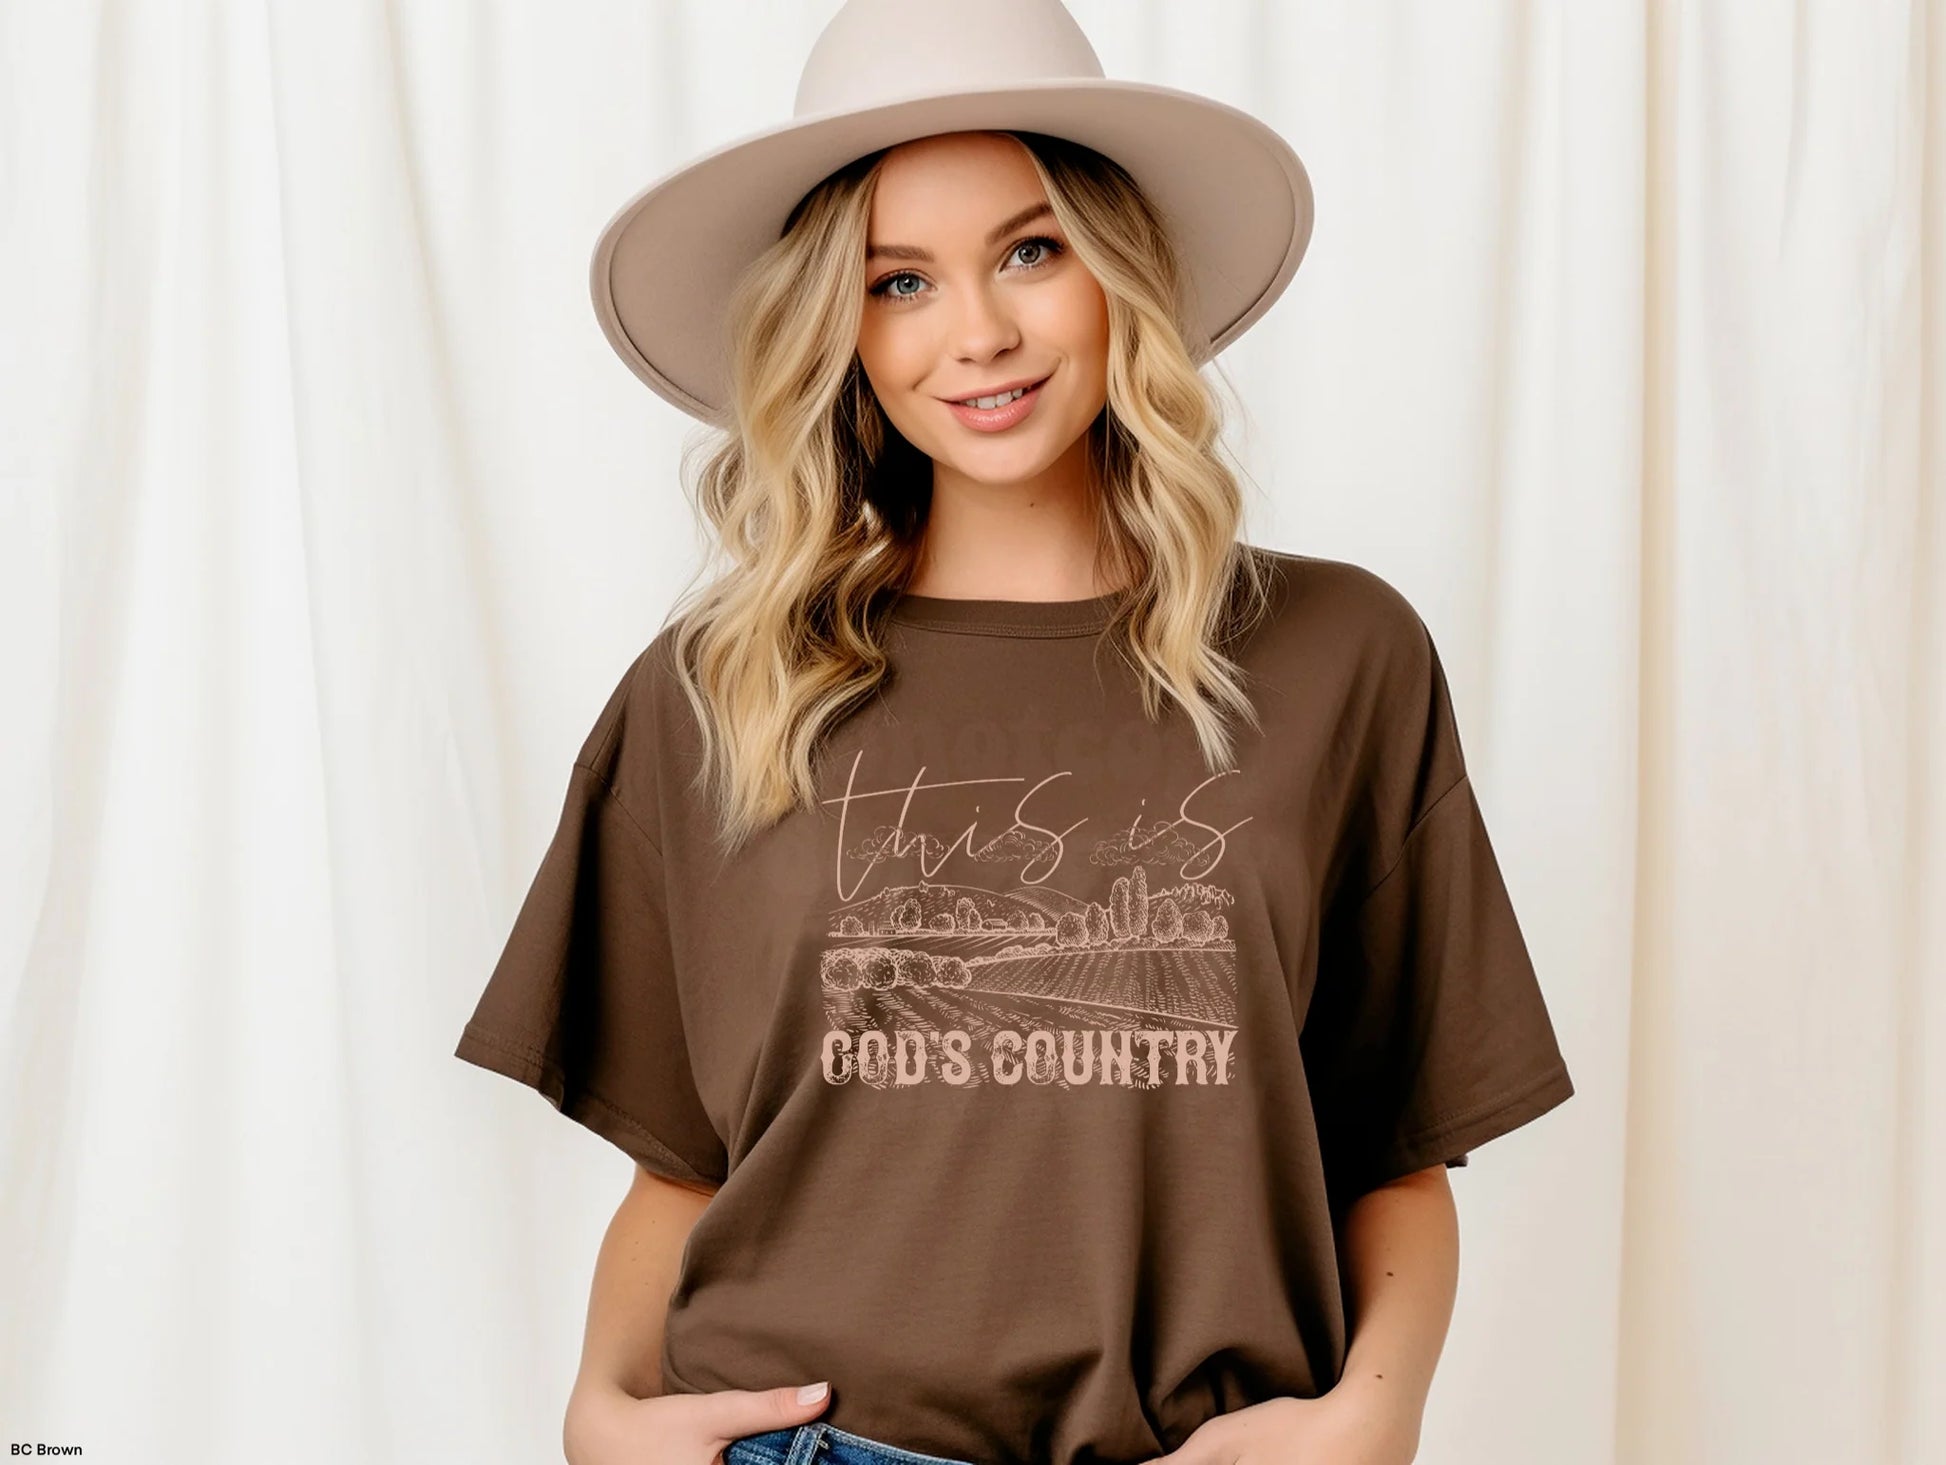 Gods Country Unisex T-shirt - Prominent Styles of Sorts- PSS!